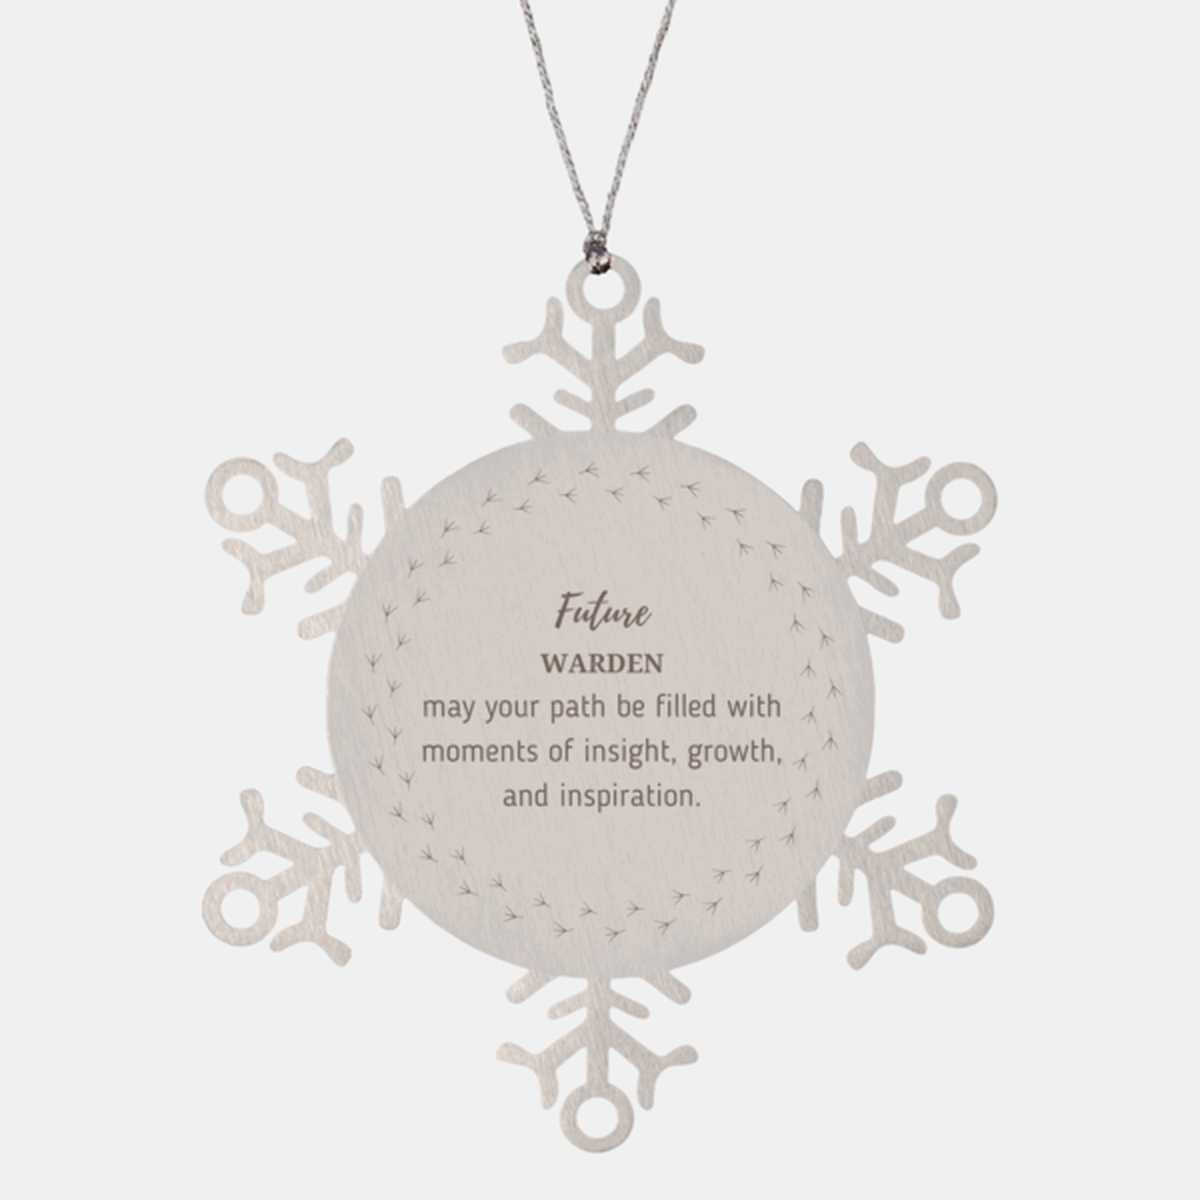 Future Warden Gifts, May your path be filled with moments of insight, Graduation Gifts for New Warden, Christmas Unique Snowflake Ornament For Men, Women, Friends